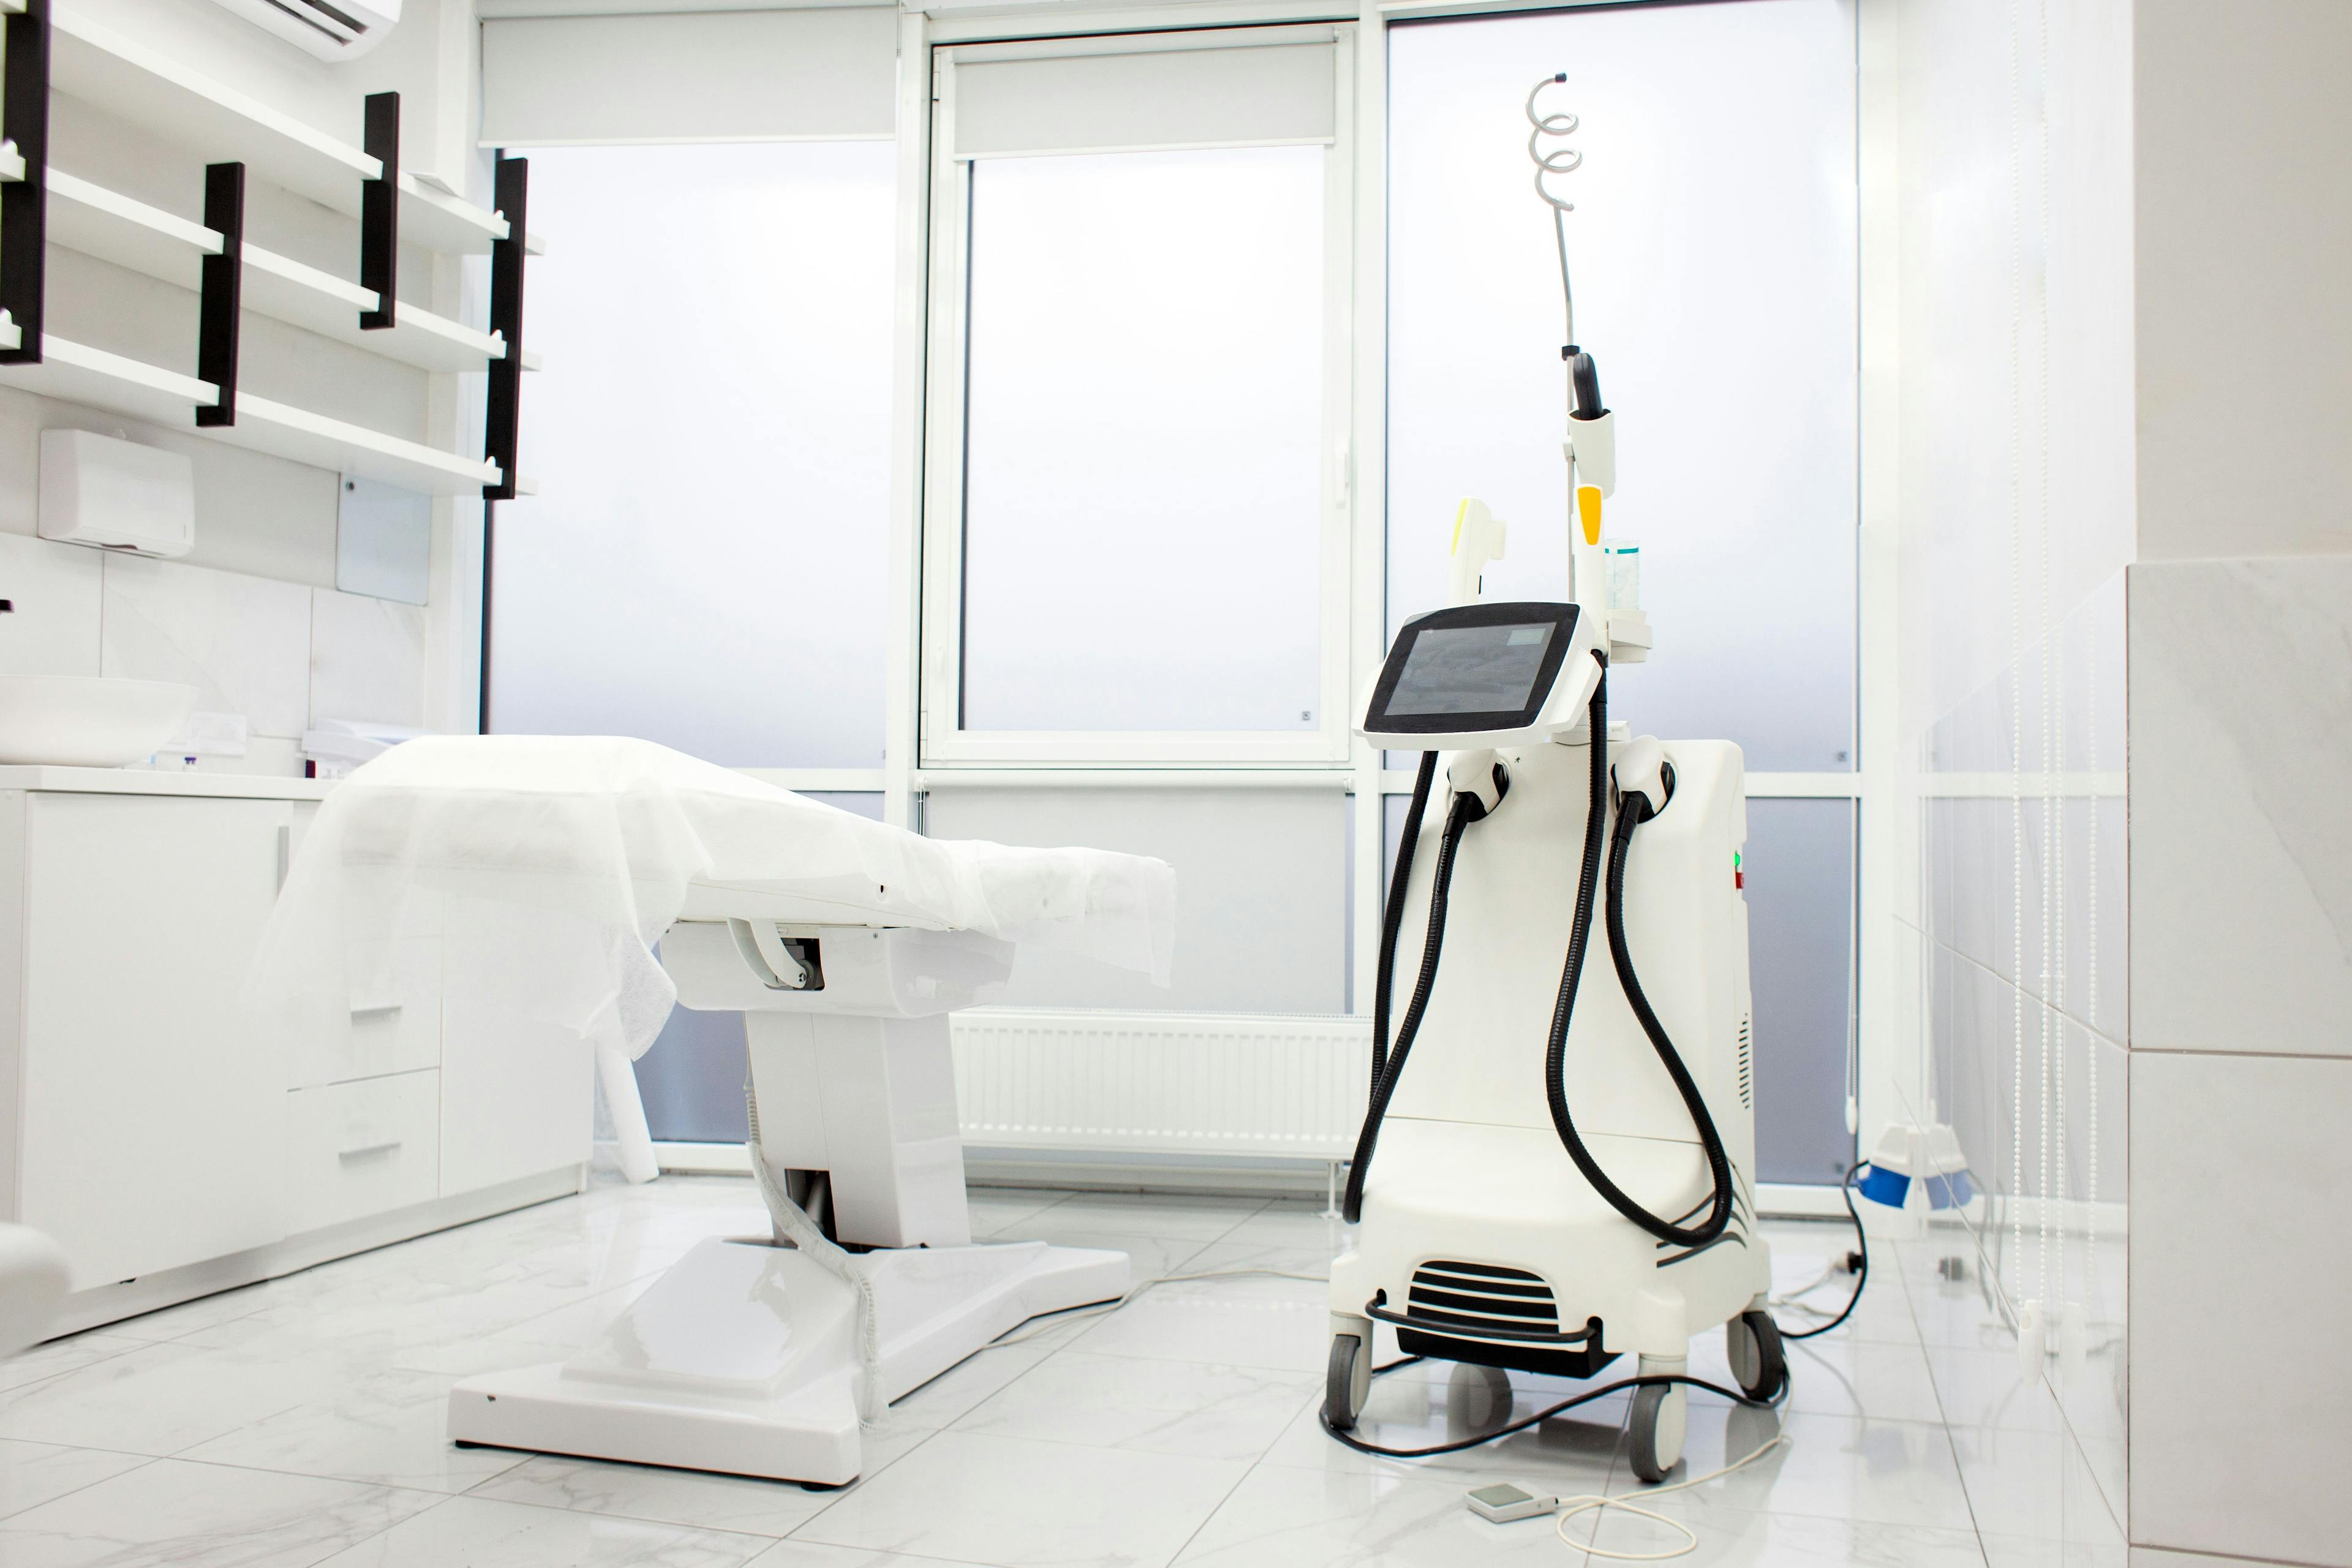 Key Considerations for Dermatology Practices Investing in New Equipment